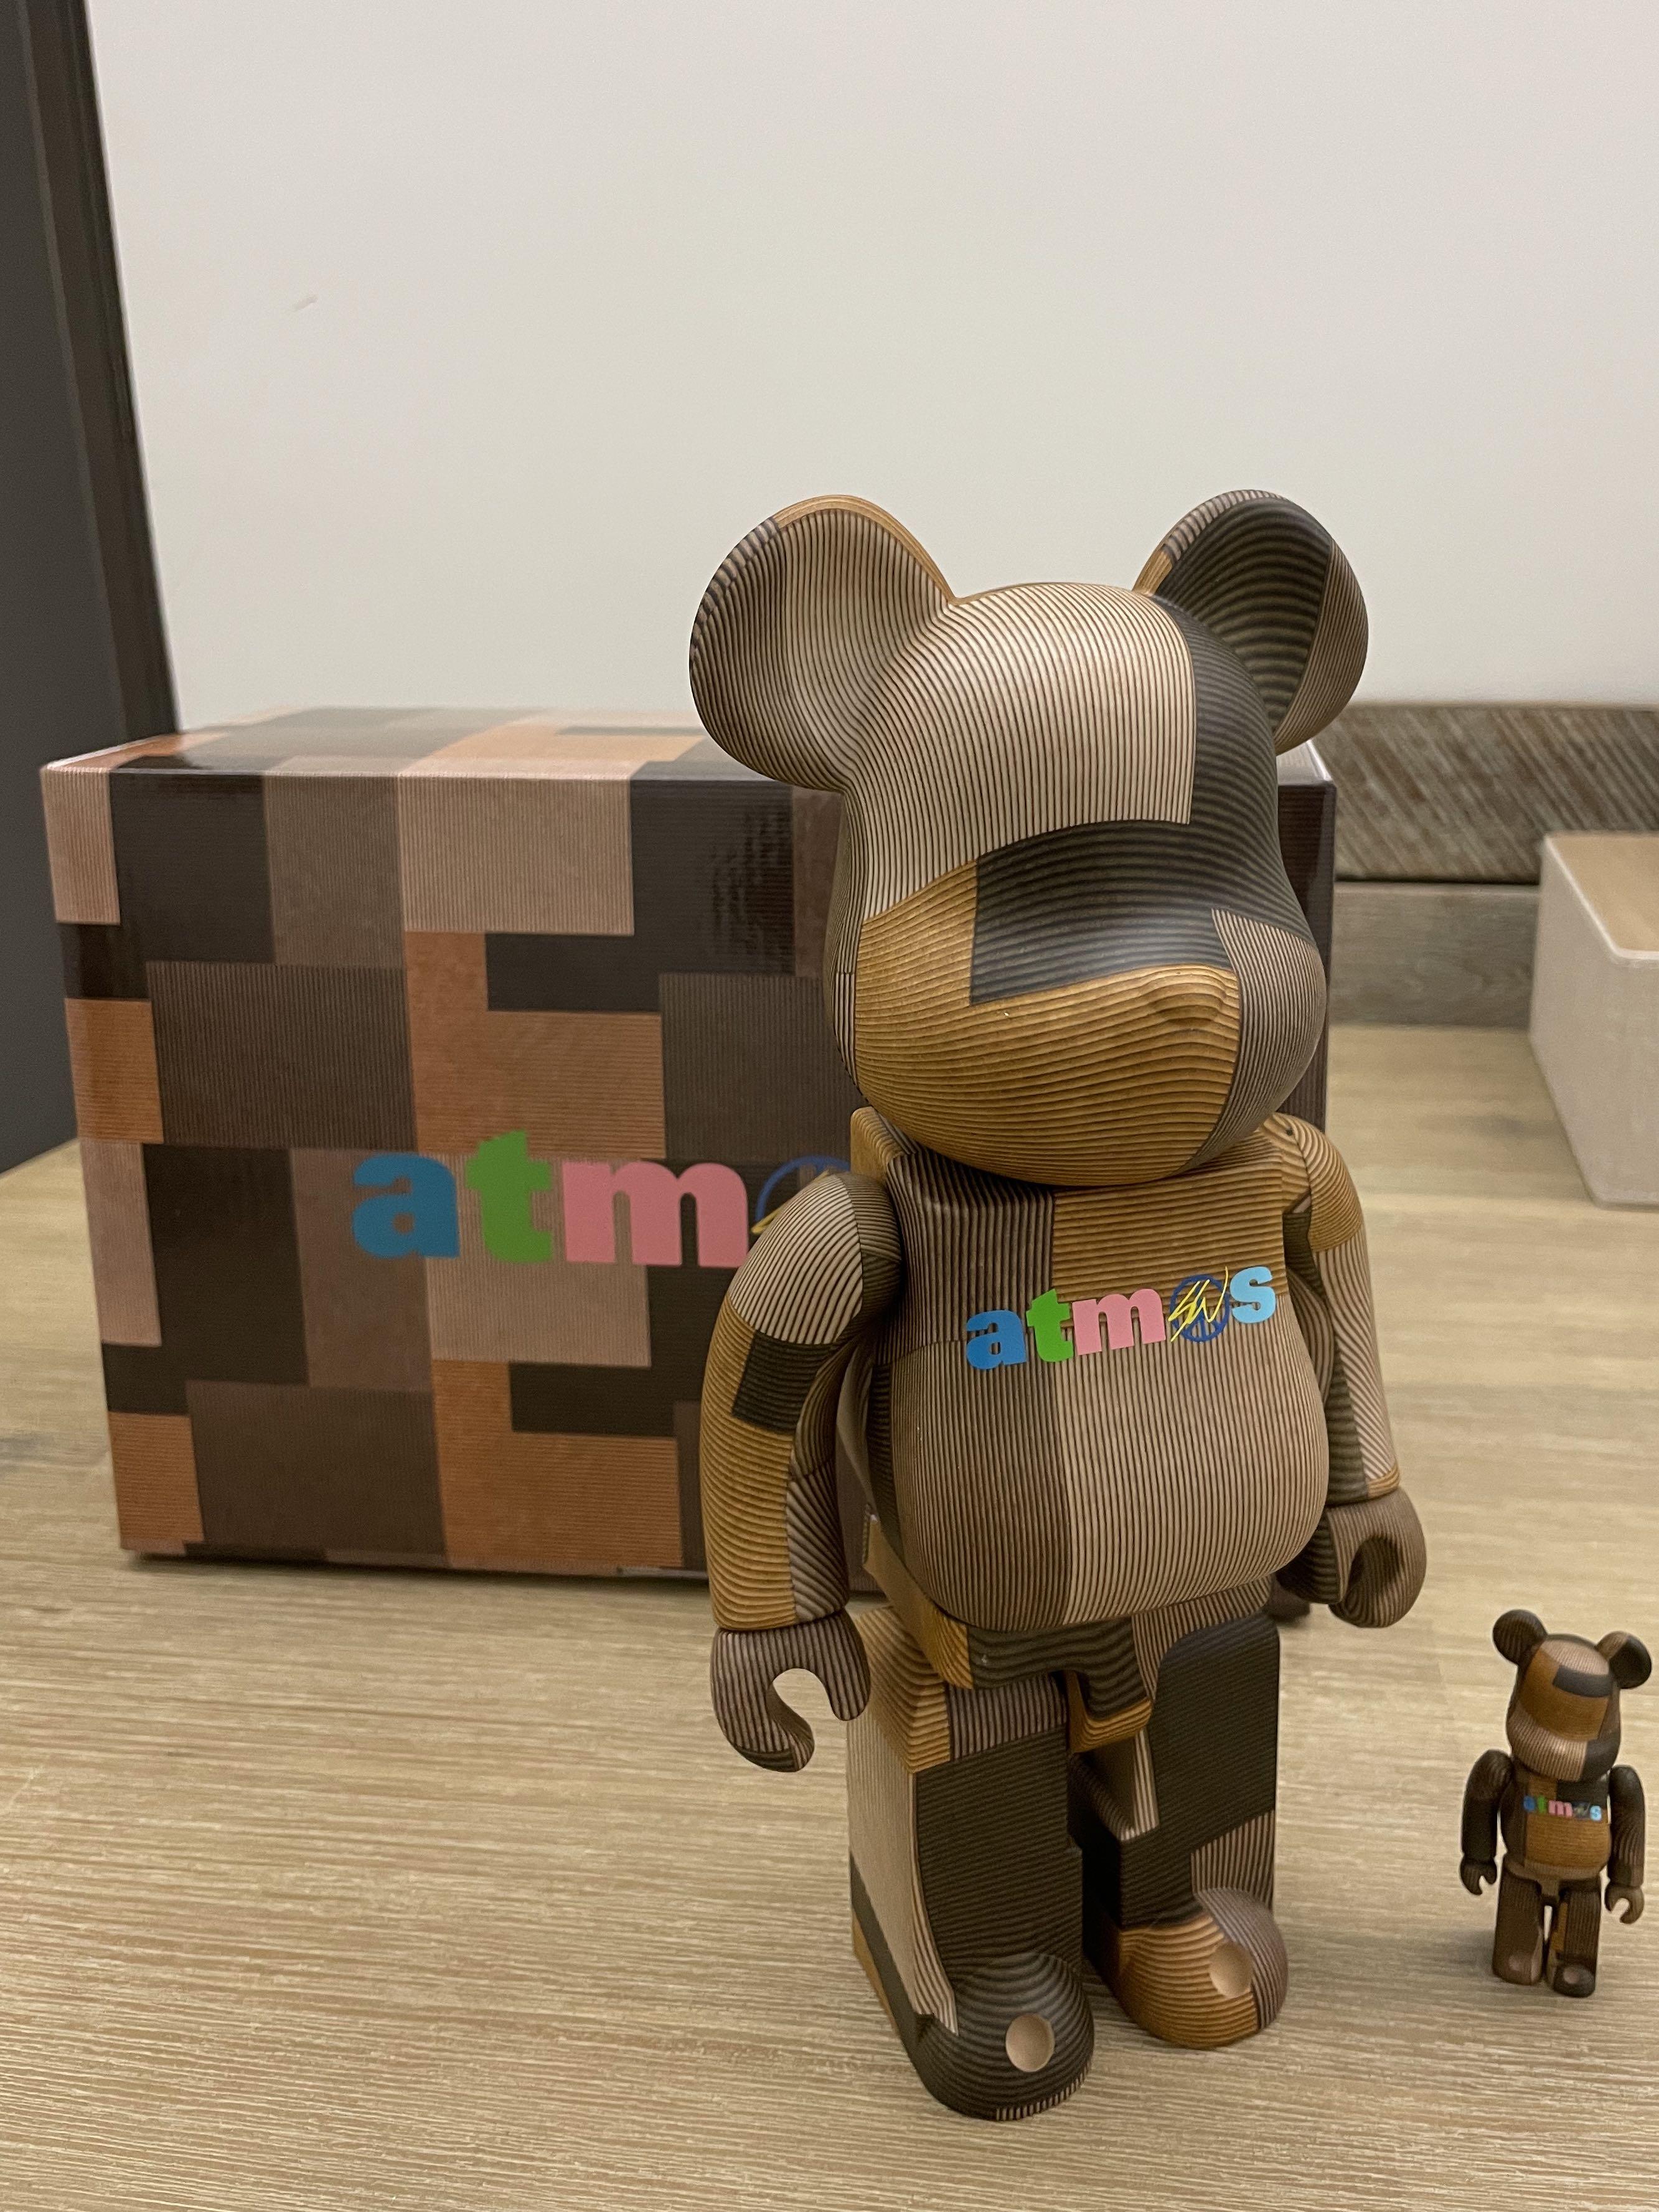 MEDICOM TOY BE@RBRICK atmos X Sean Wotherspoon 1000% 21FA-S ...